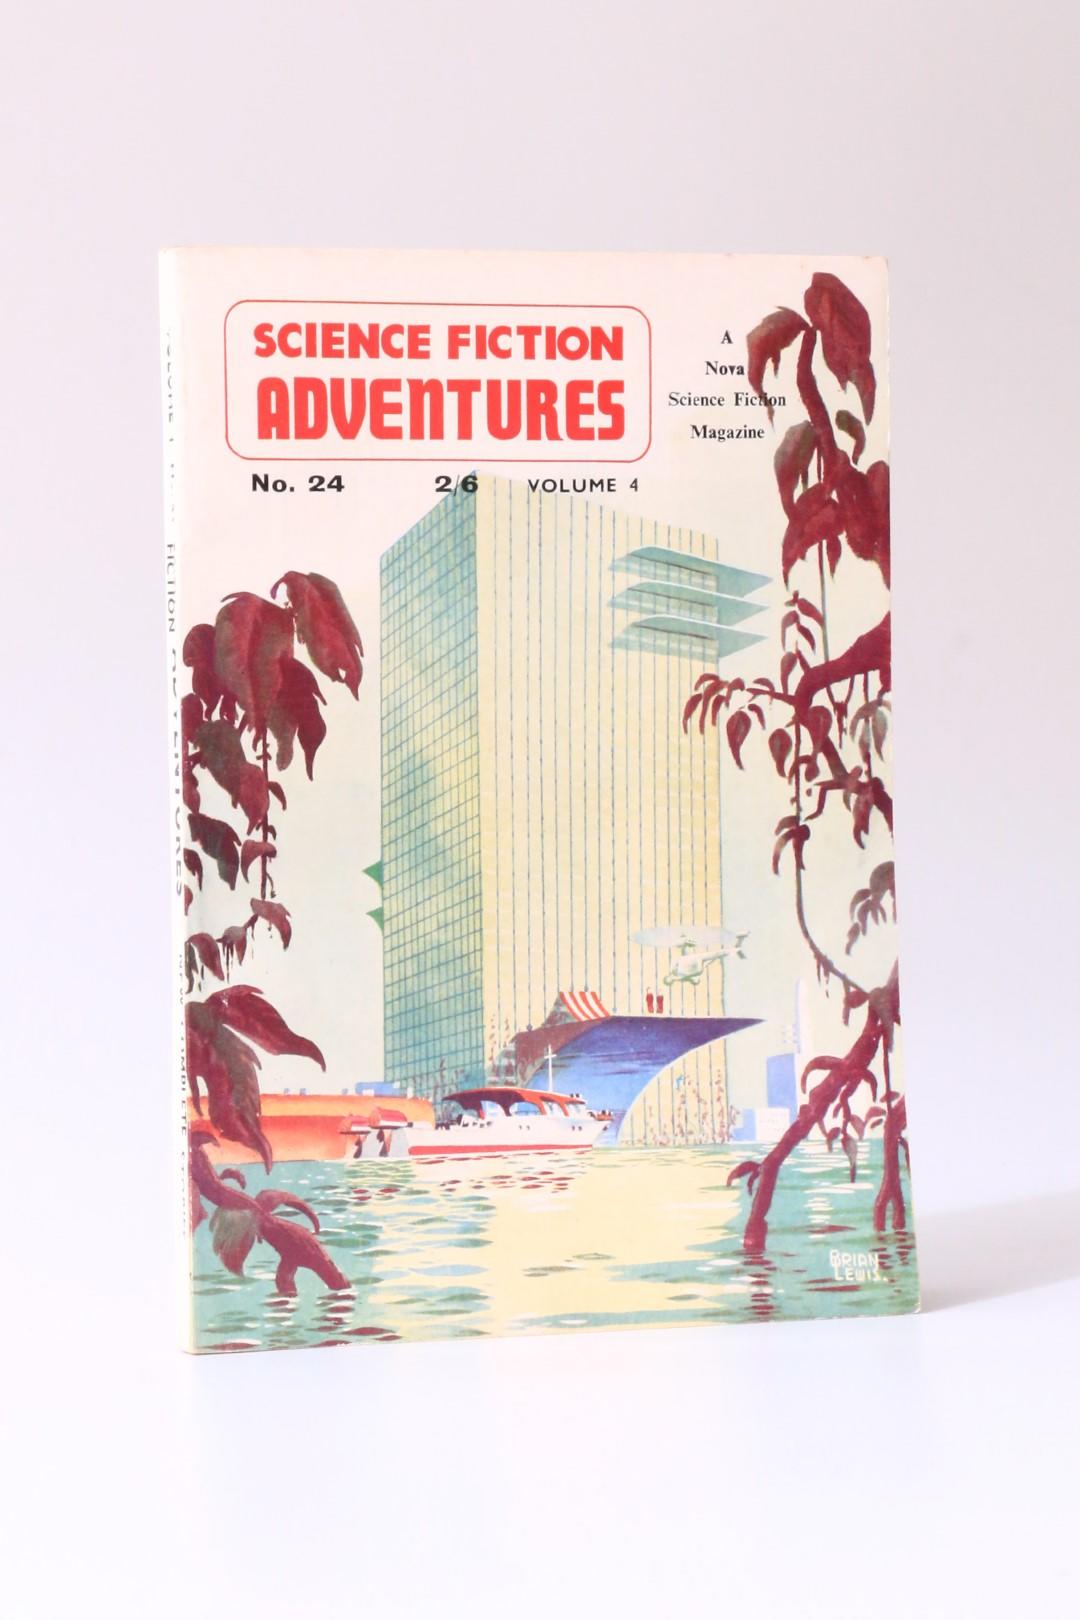 Various [J.G. Ballard interest] - The Drowned World [in] Science Fiction Adventures [Volume 4, No. 24] - Nova Publications, 1962, First Edition.